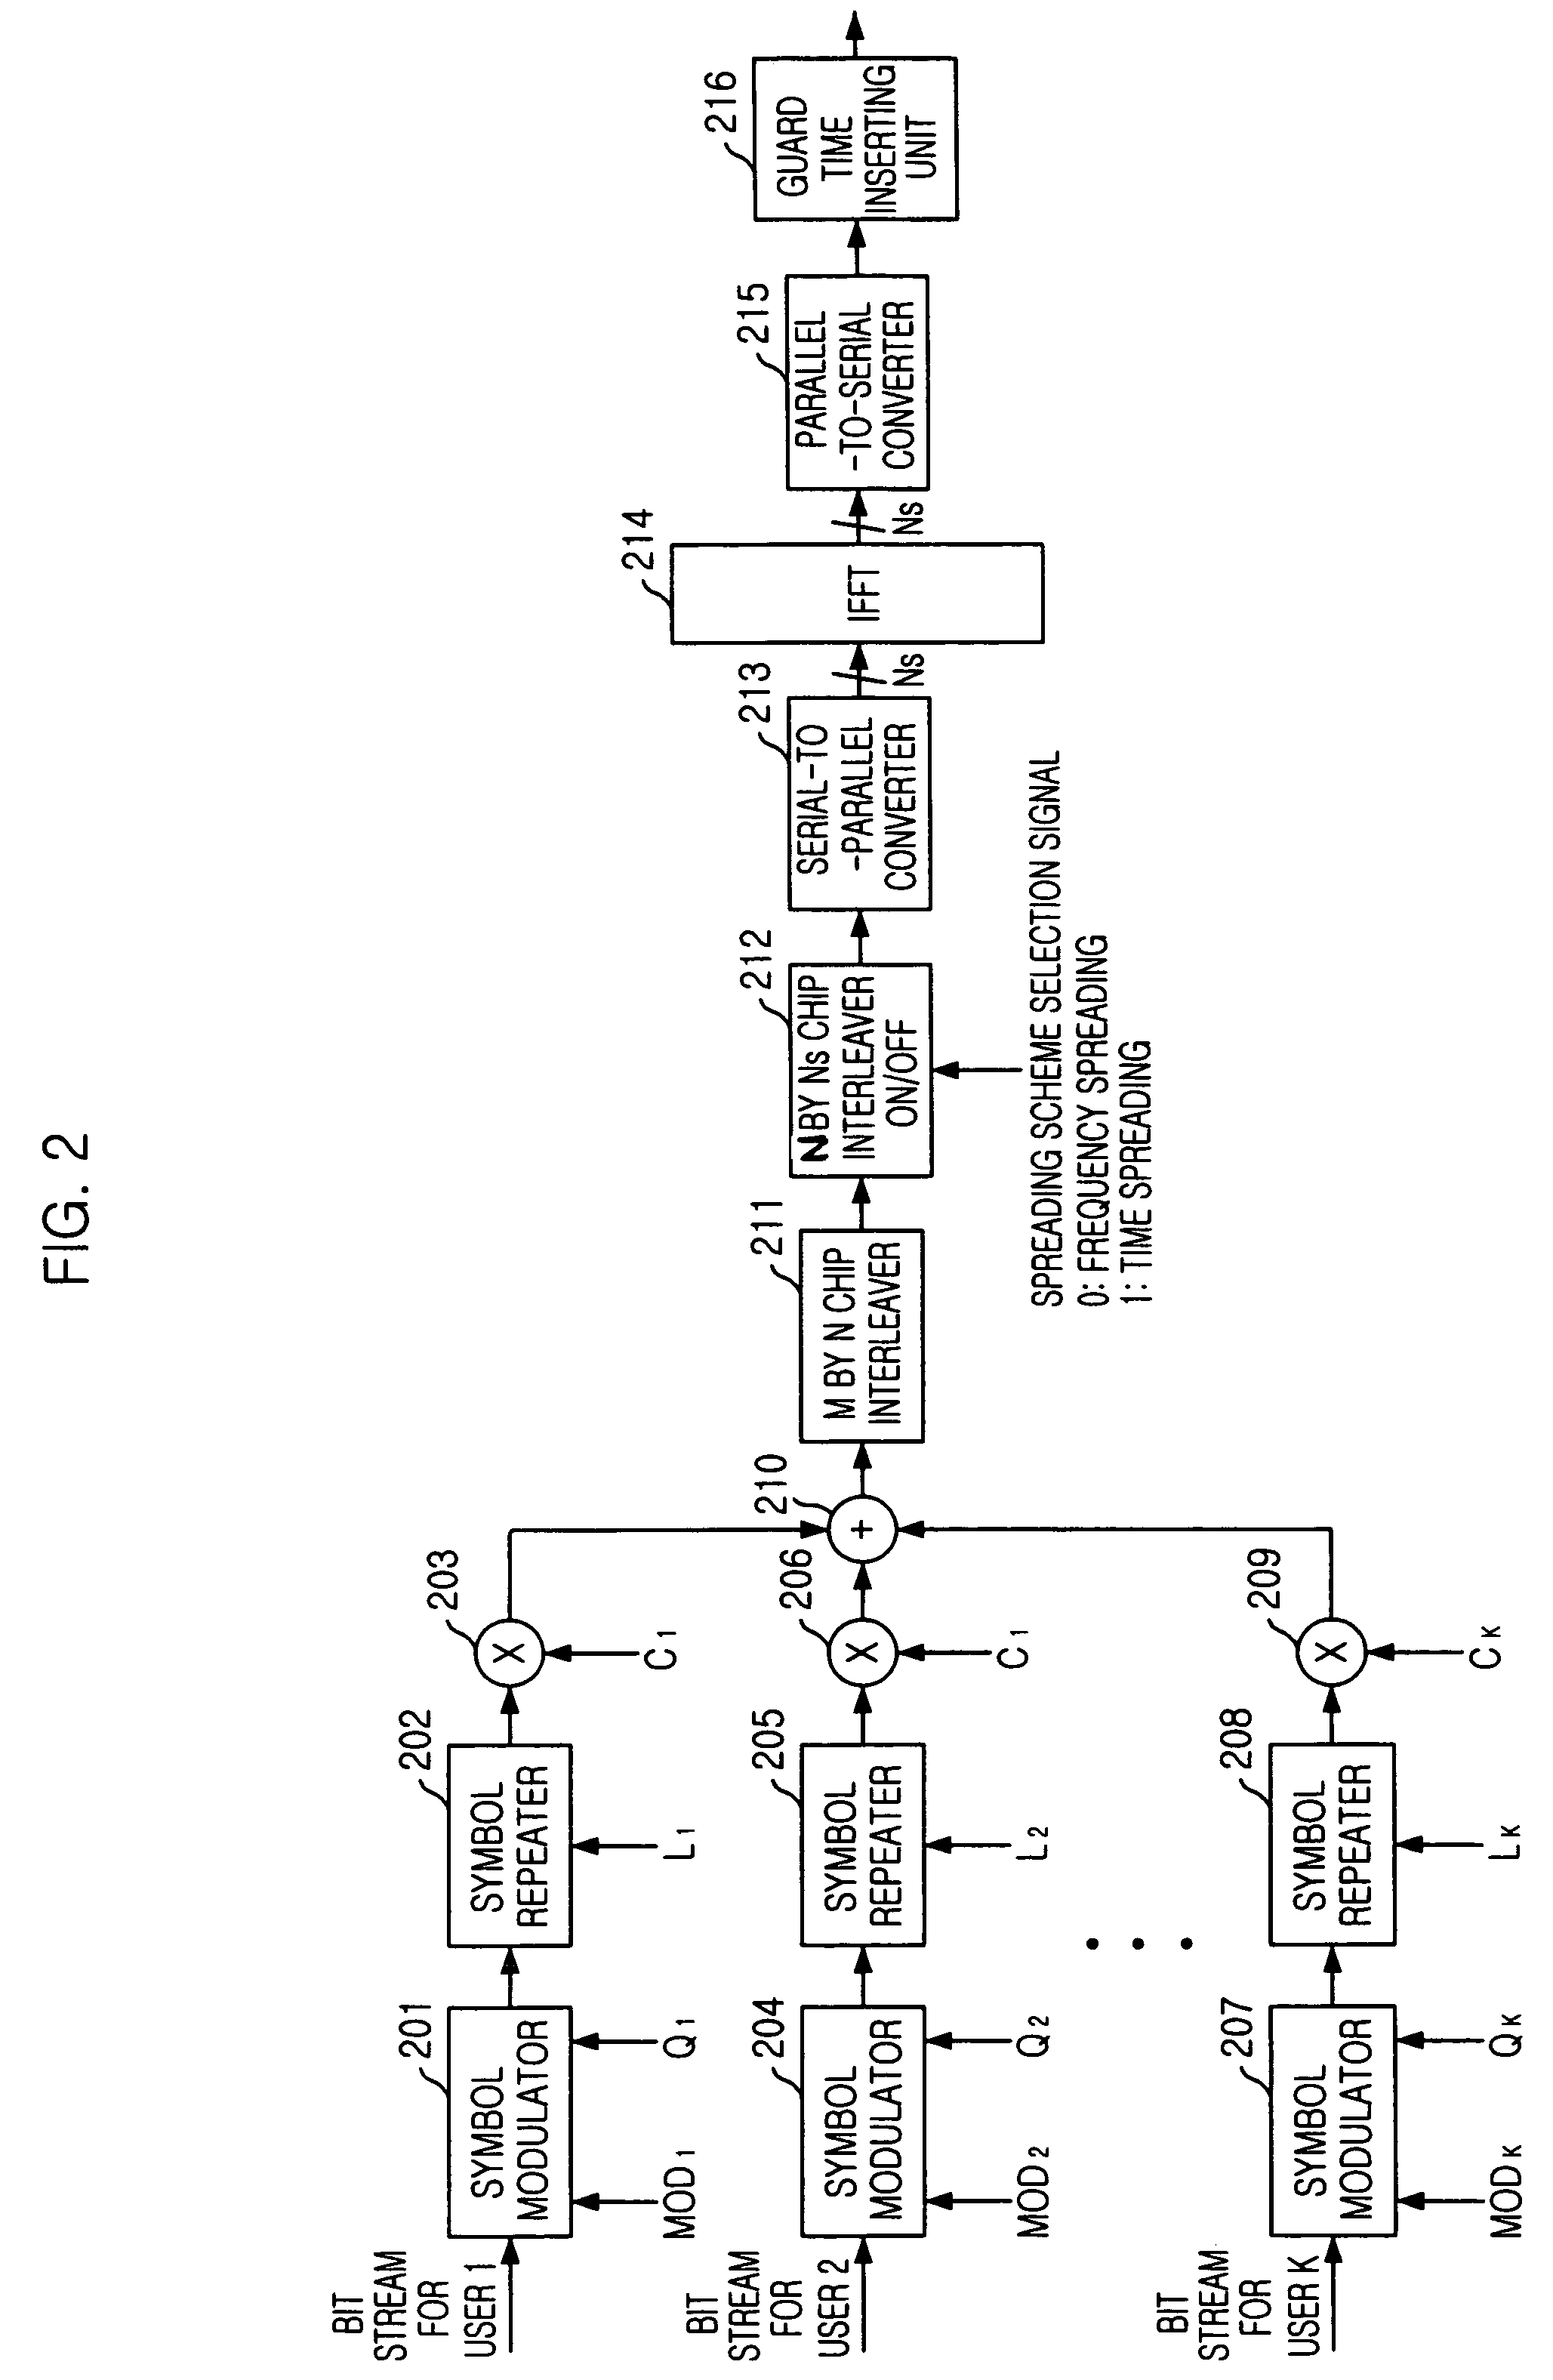 MC/MC-DS dual-mode adaptive multi-carrier code division multiple access (CDMA) apparatus and method thereof